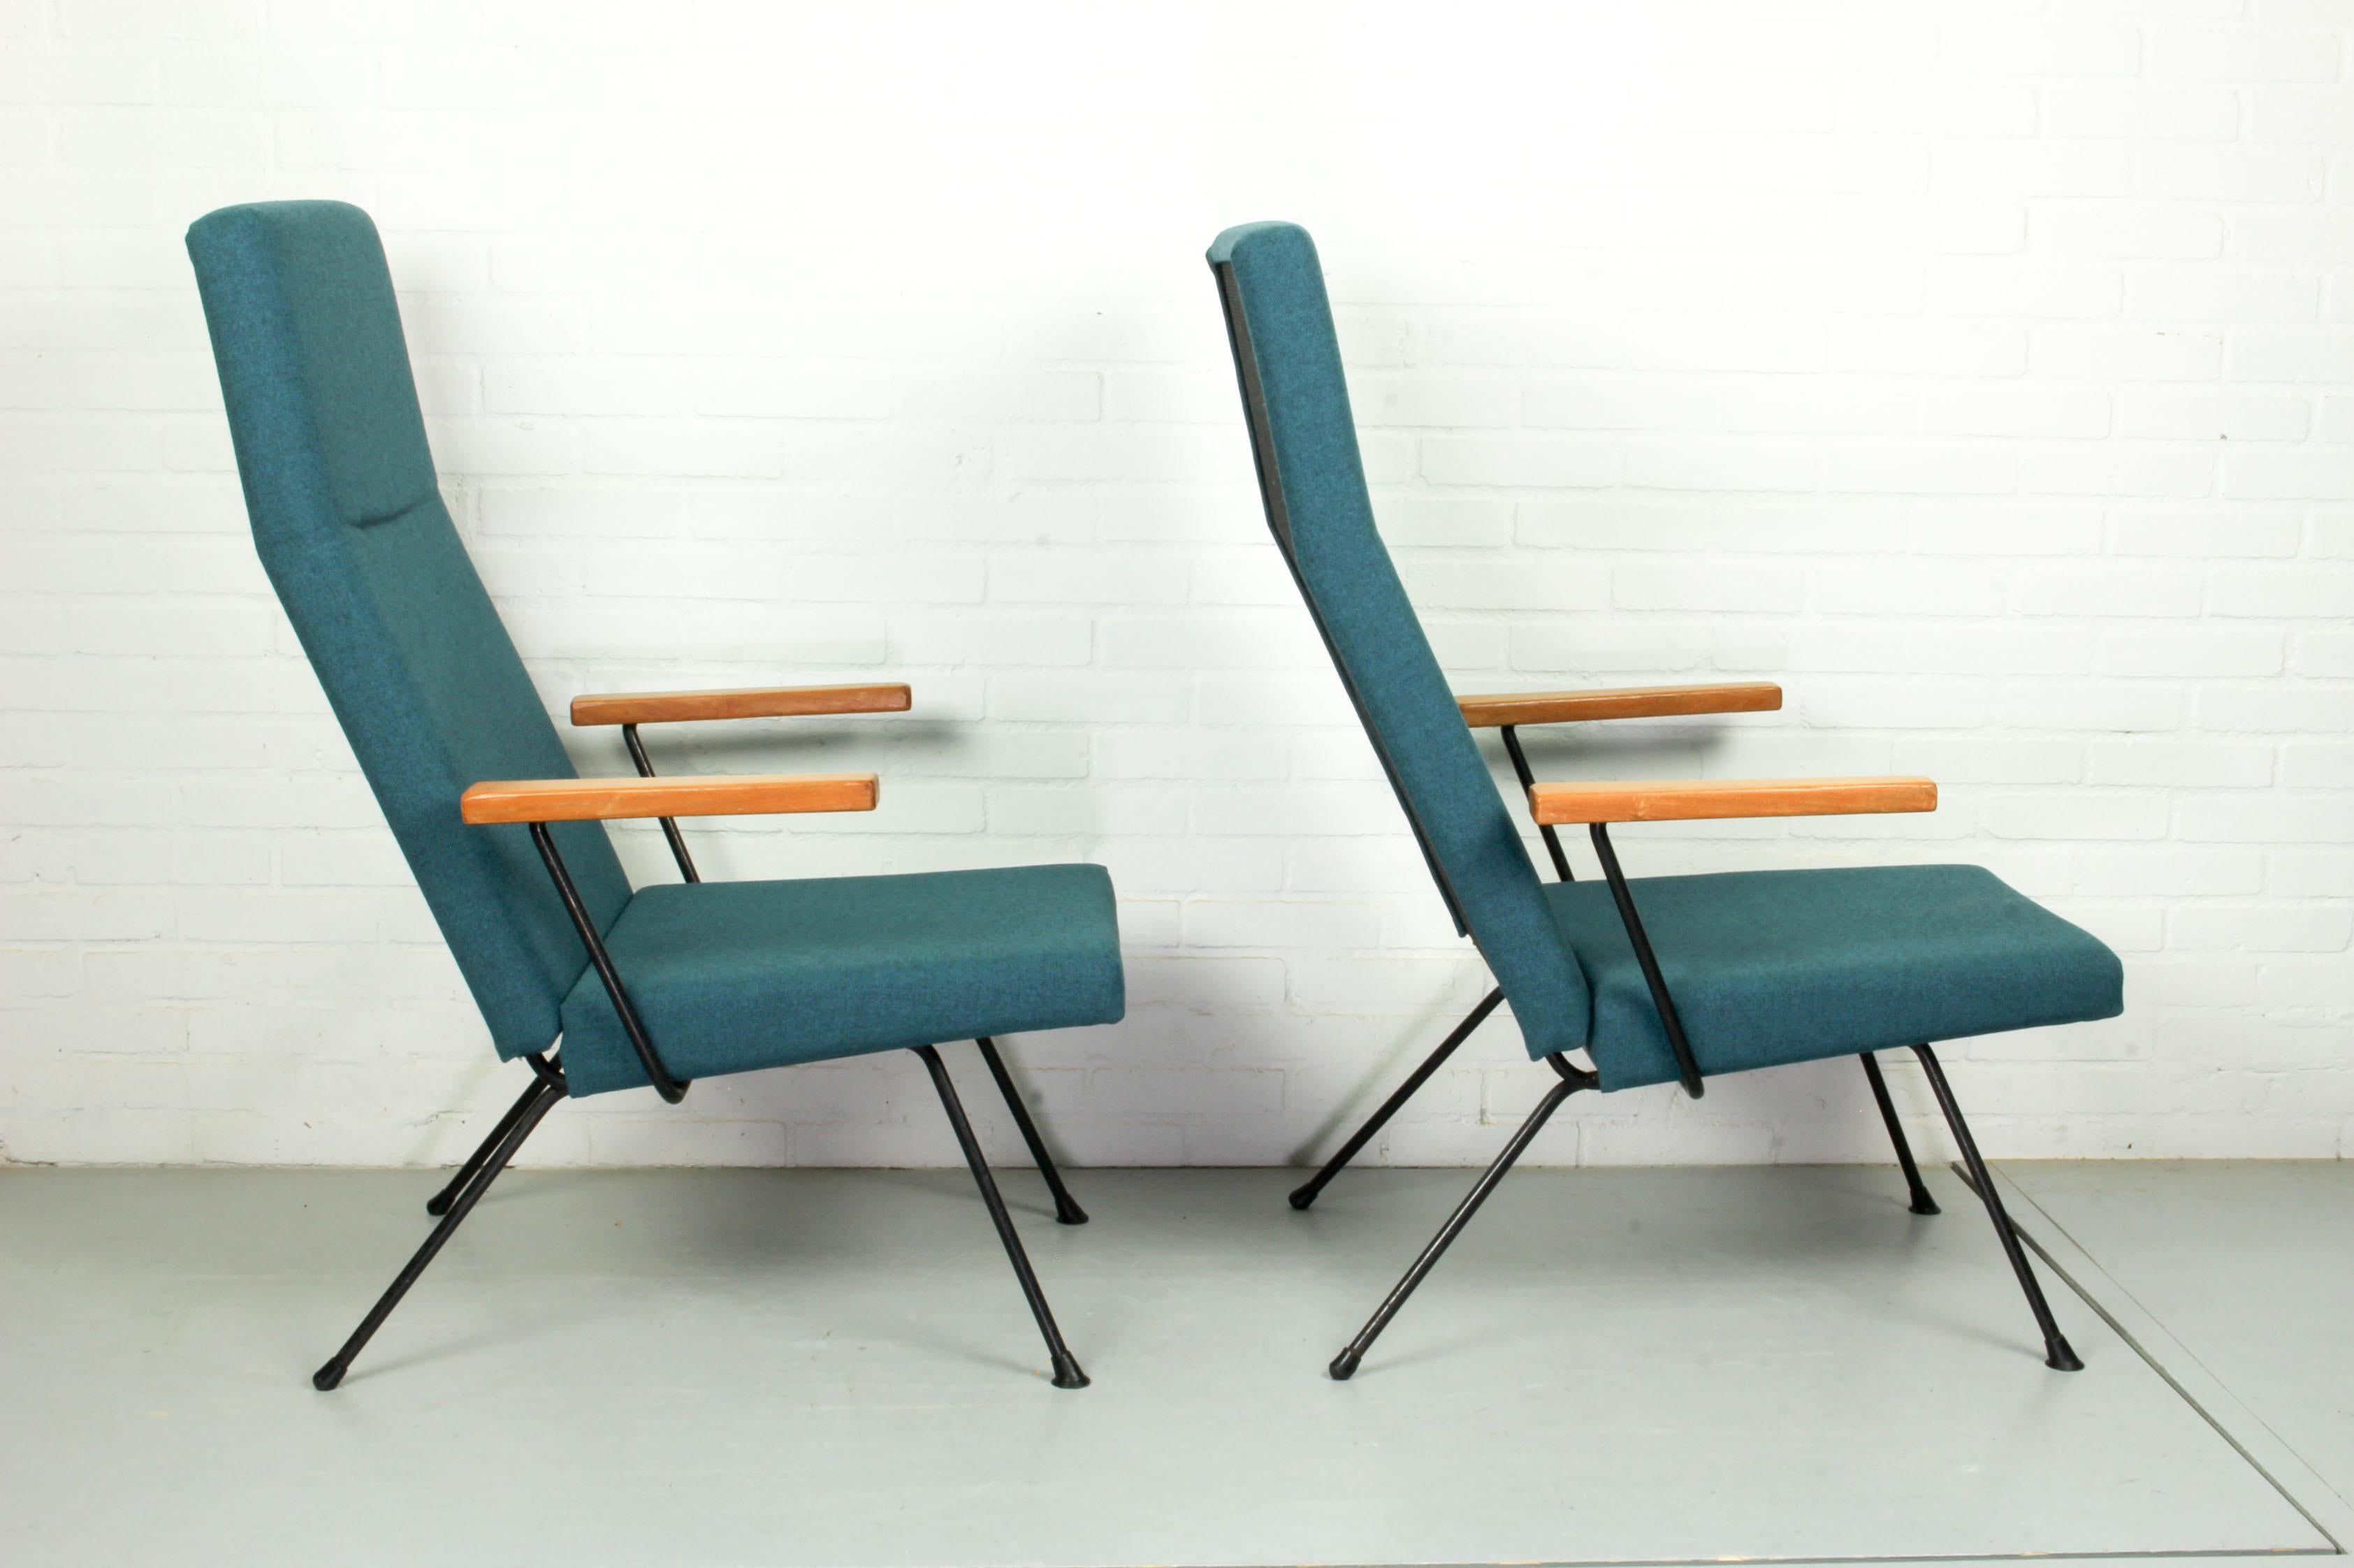 A.R. Cordemeyer 1410 easy chairs designed for Gispen in 1959. These chairs have been re-upholstered in Kvadrat Tonica blue grey fabric (color 831), black metal frame and solid teak armrests, all in very good condition. This model (1410) is identical